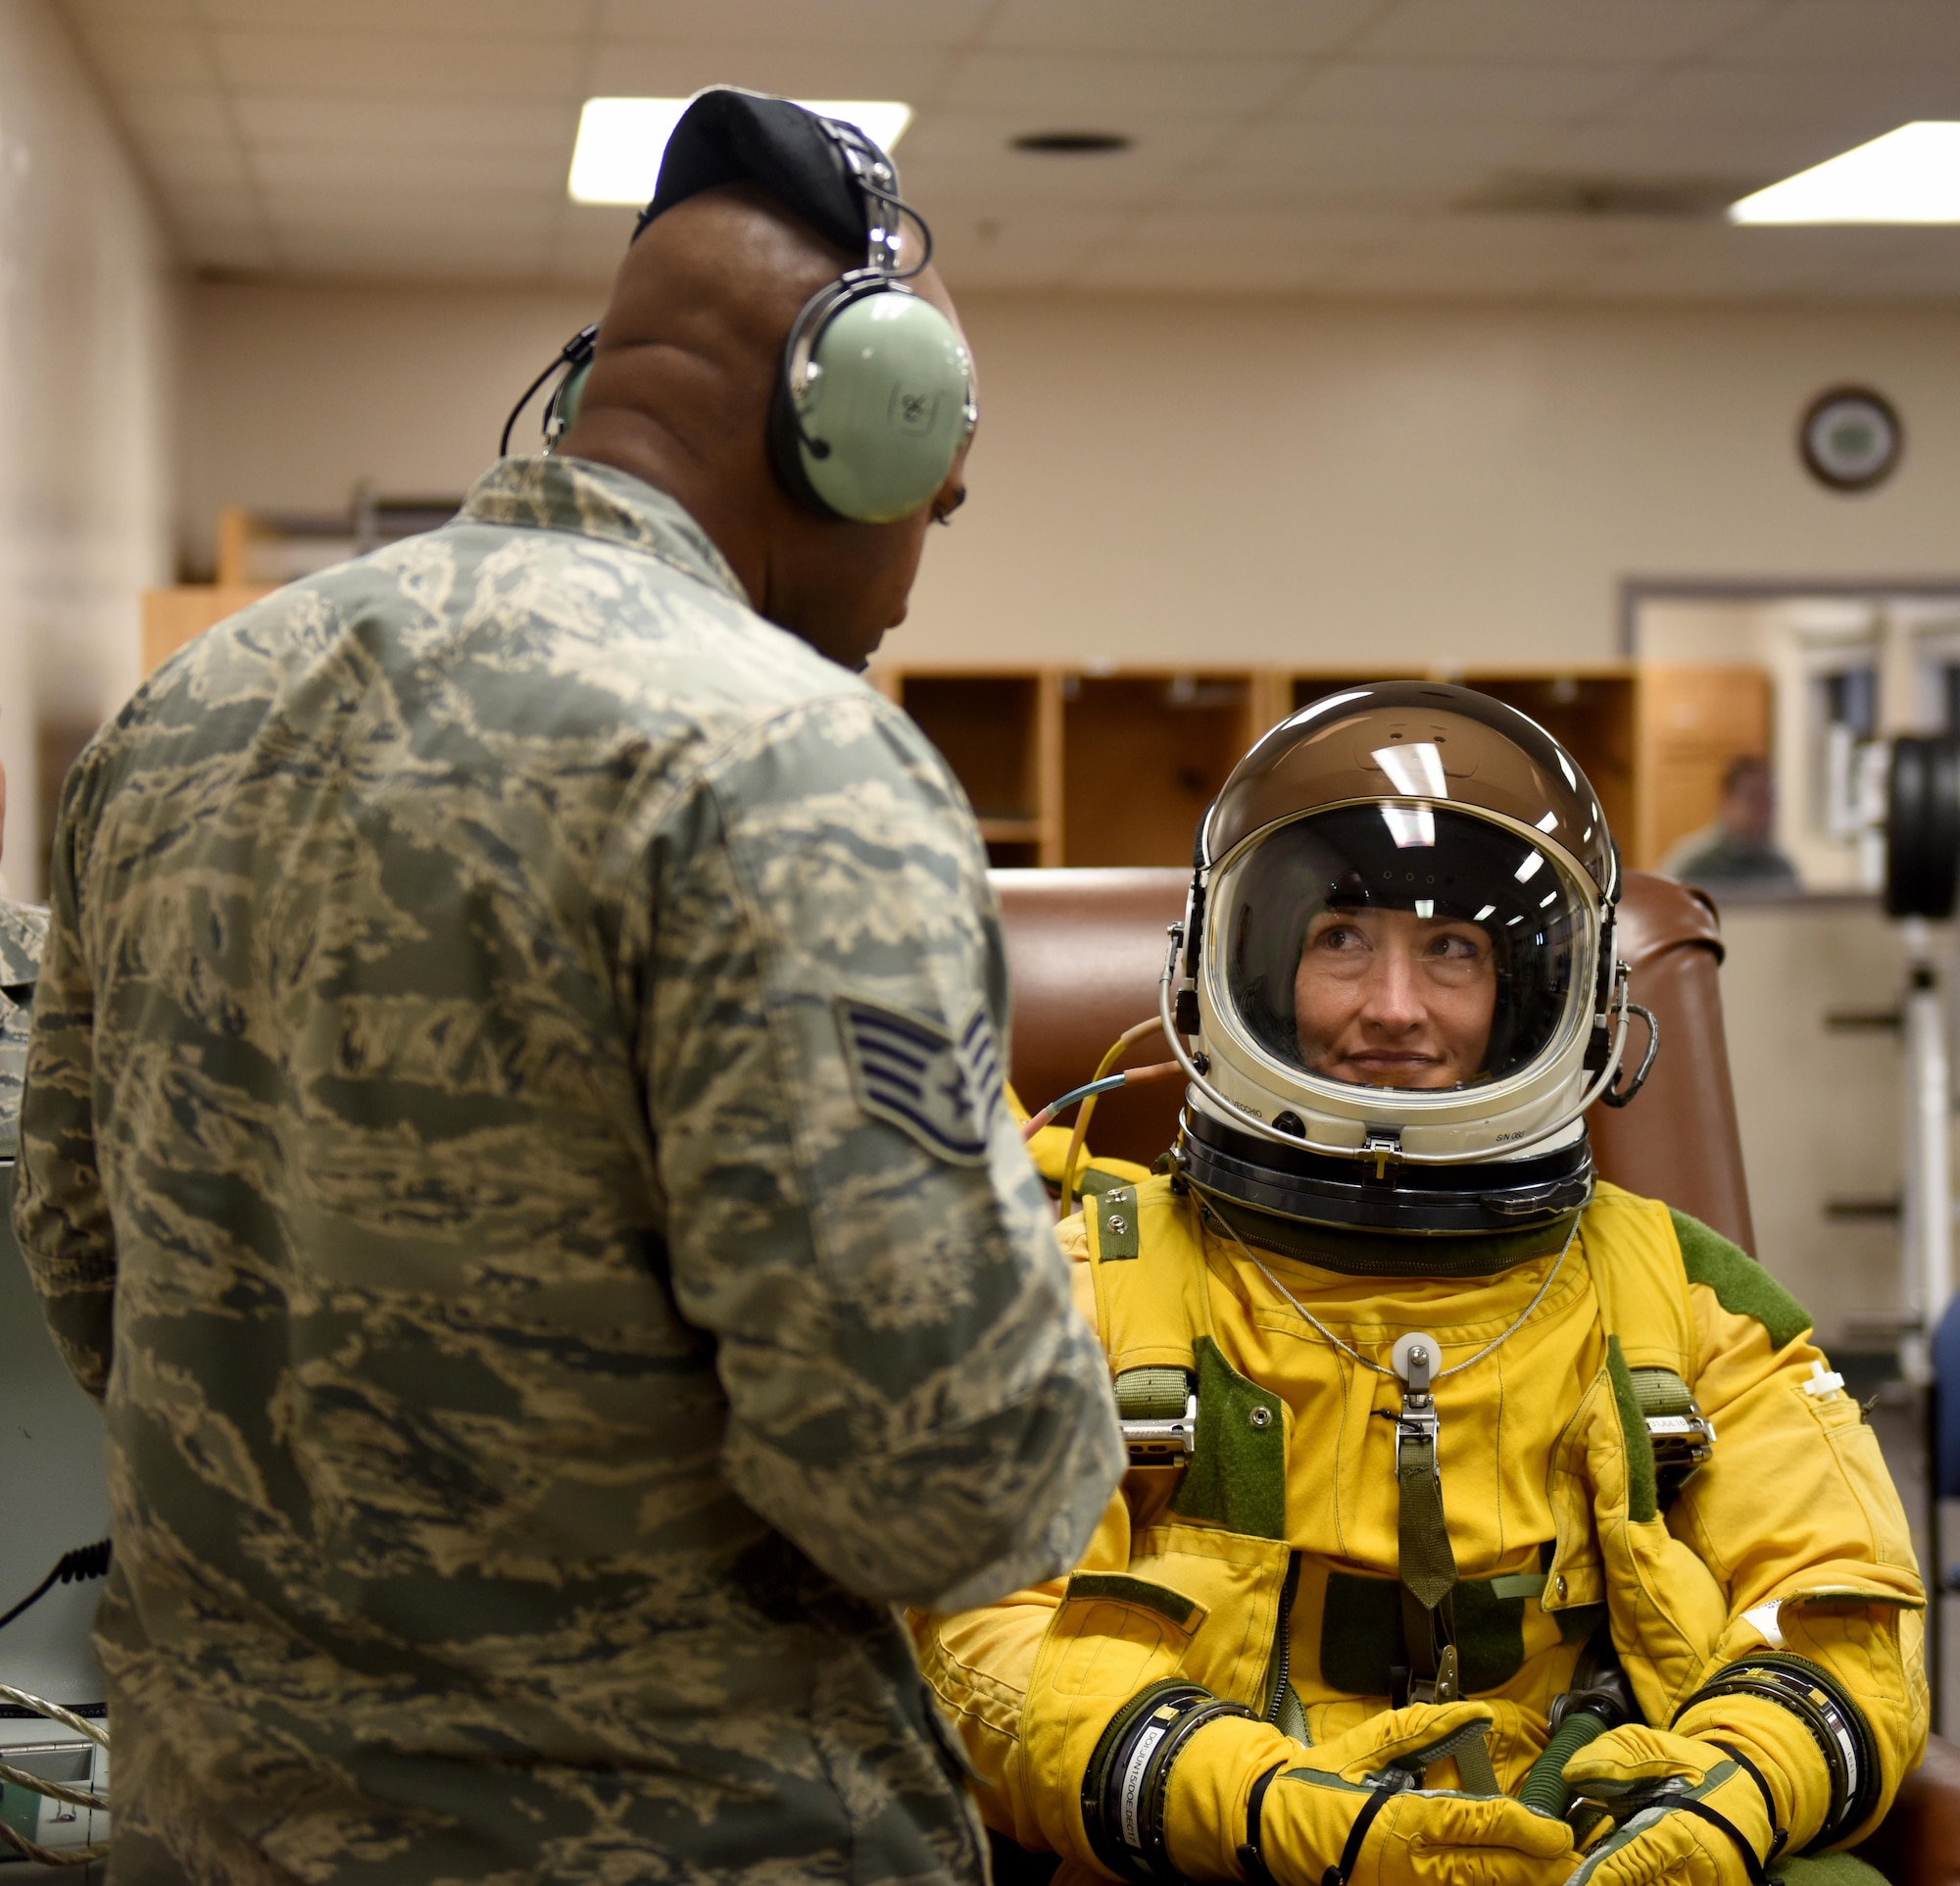 Staff Sgt. Reginald Randolph, 9th Physiological Support Squadron aerospace physiology technician, speaks with Christina Koch, NASA astronaut, regarding her experience in a full-pressure suit July 7, 2016, at Beale Air Force Base, California. Koch is undergoing Space Flight Readiness Training. (U.S. Air Force photo/ Senior Airman Bobby Cummings)